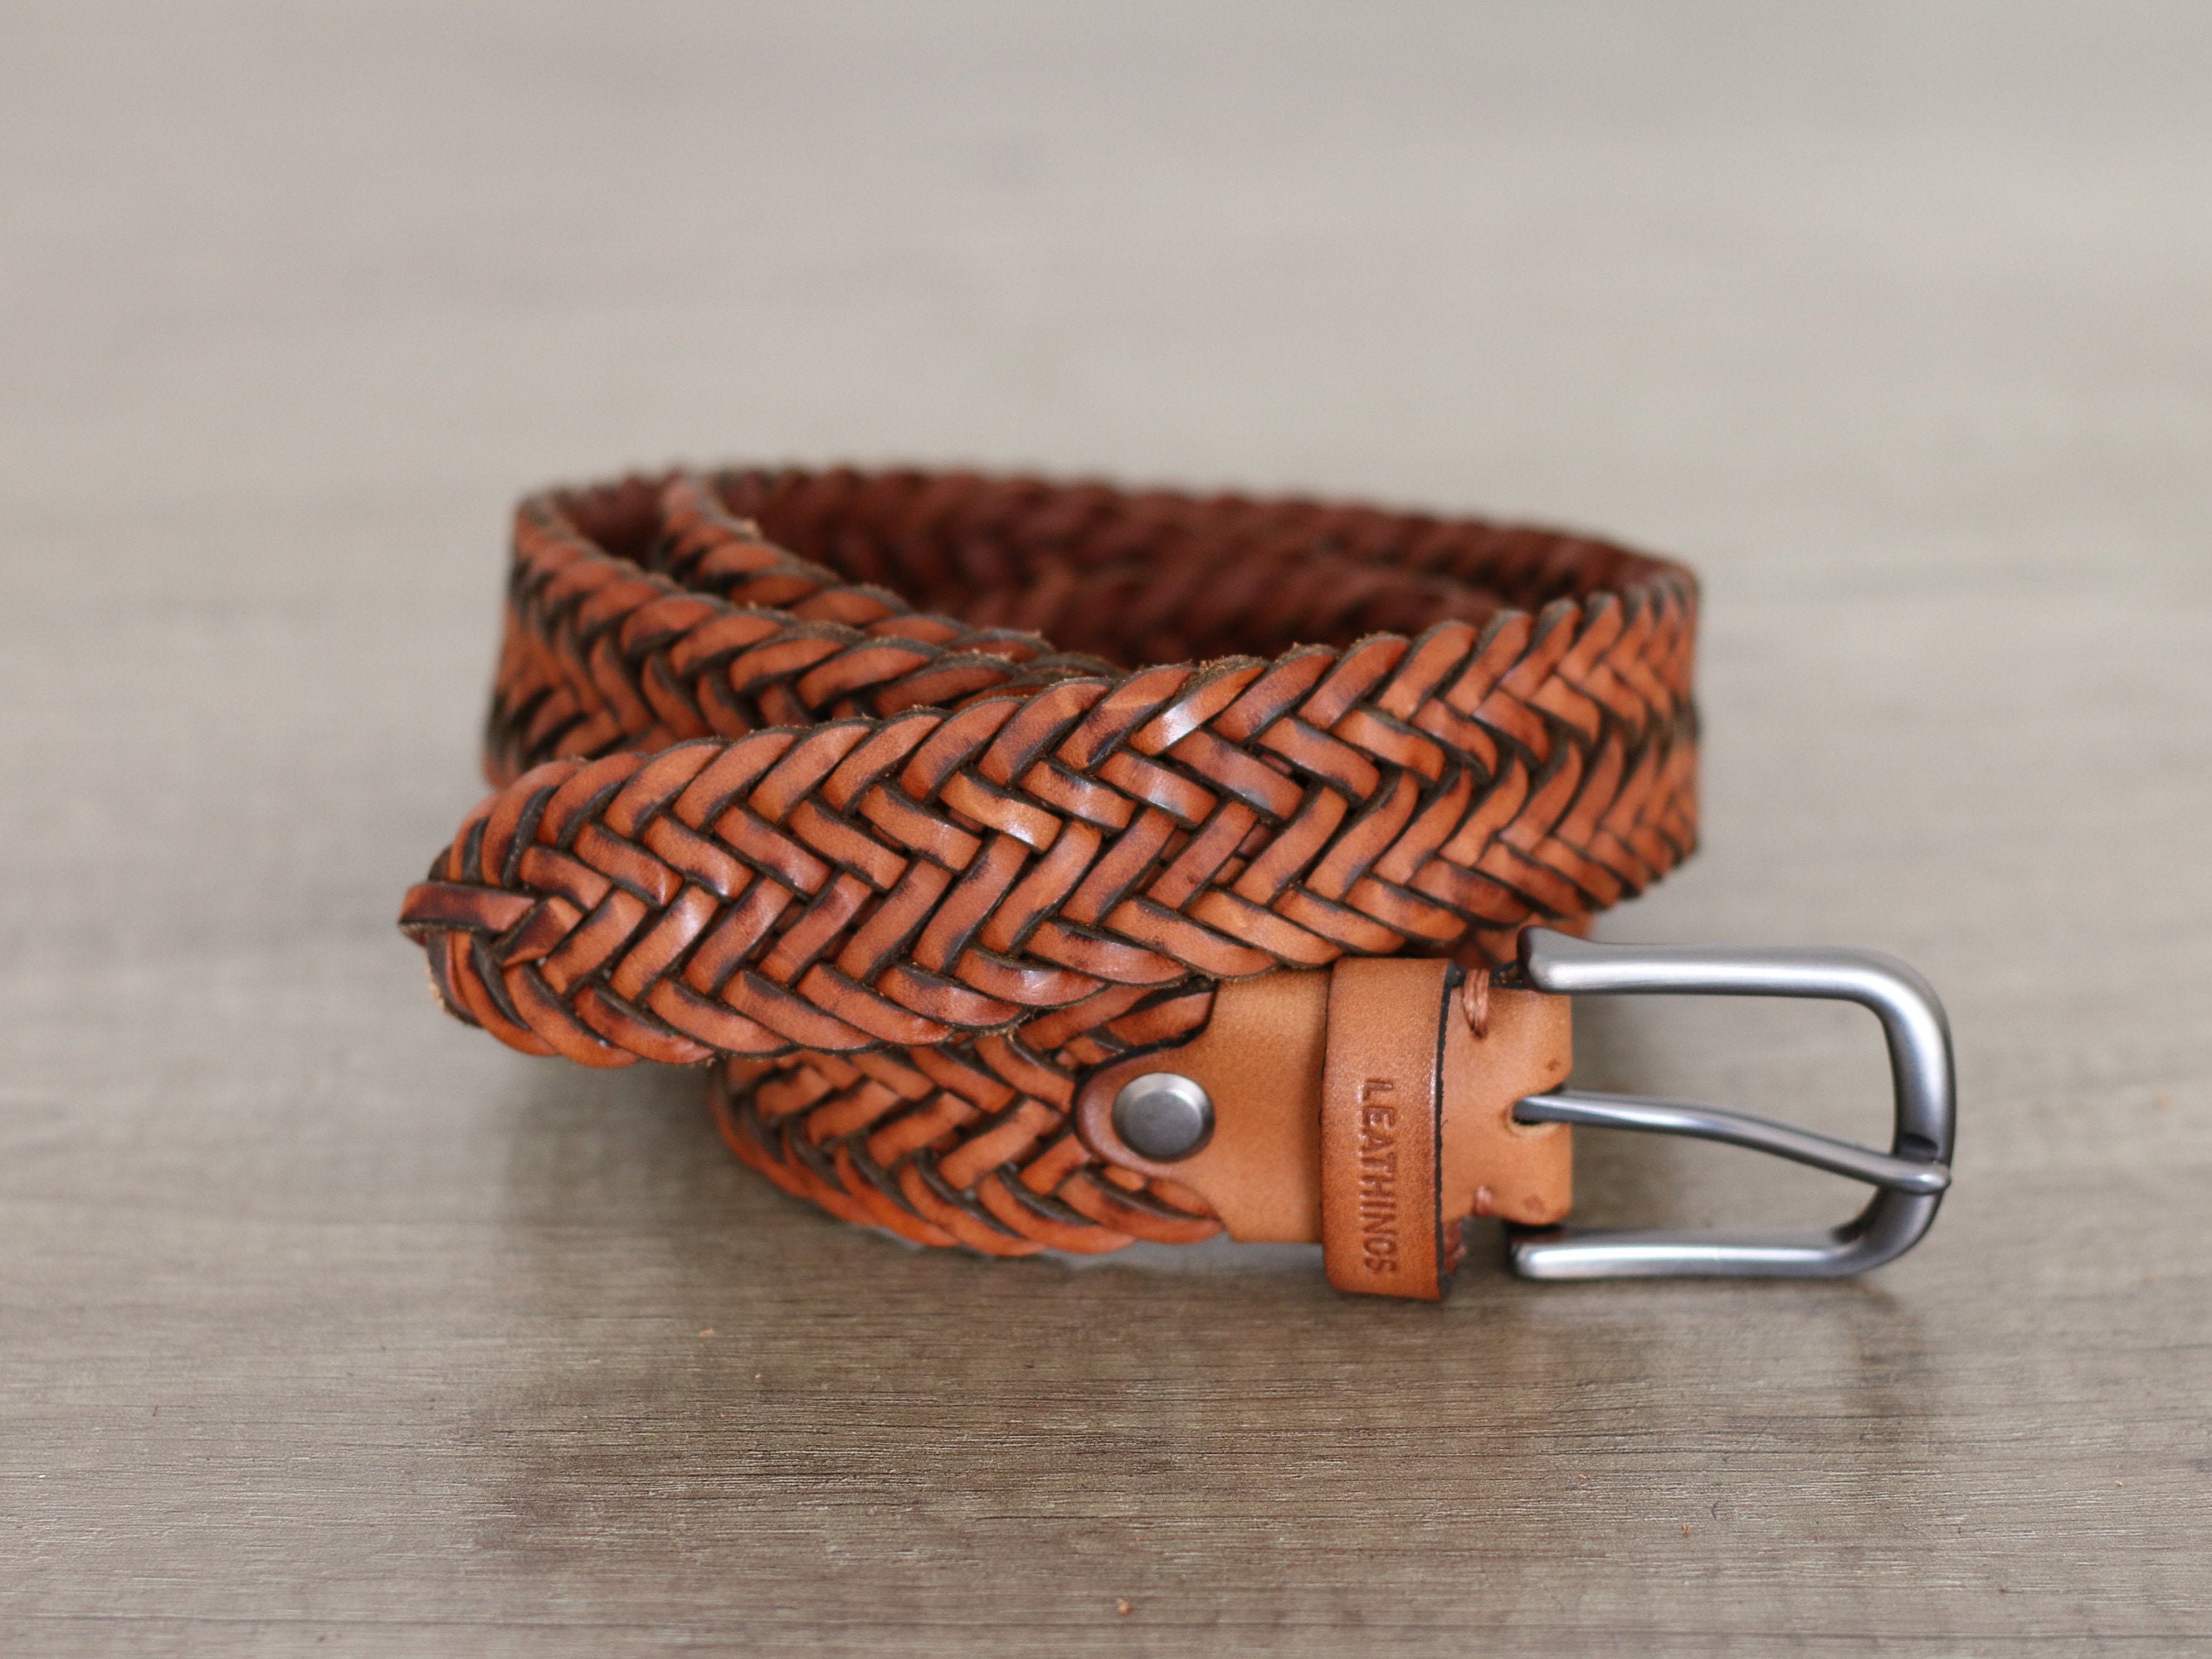 Braid Leather Belt Handcrafted Full Grain Brown Braided Belts Elegant  Stylish for Men's and Women Belt Uniqe Hand Braid Real Leather Belt 